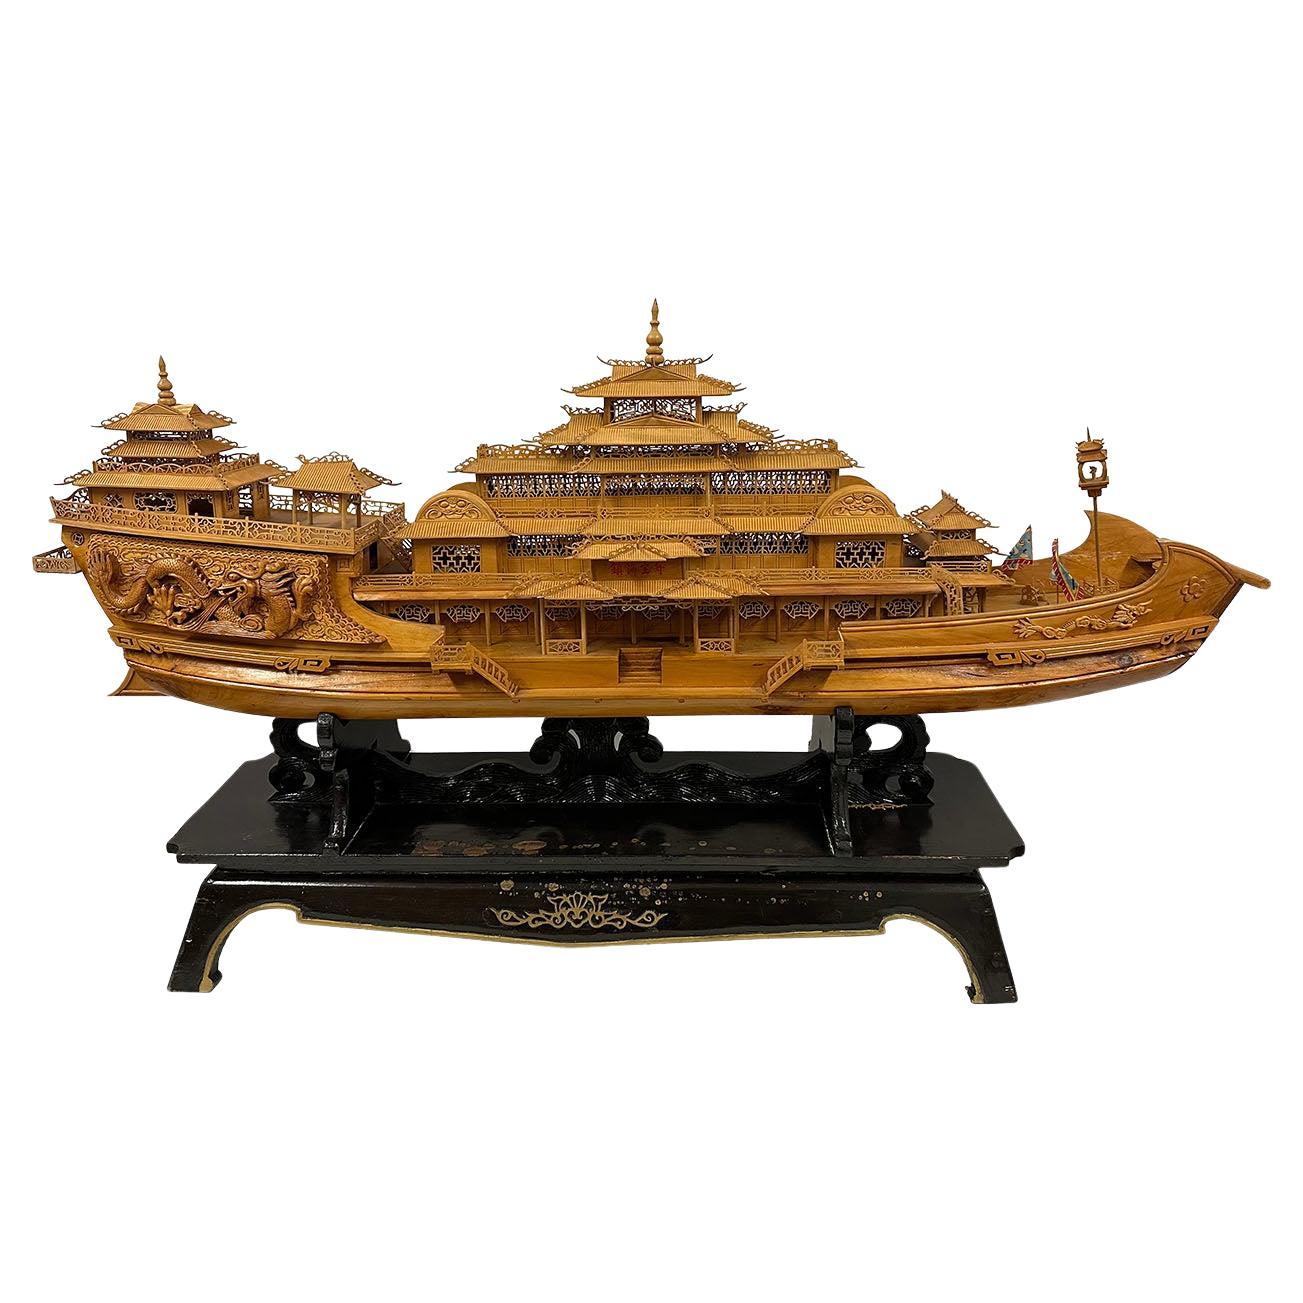 Mid-20th Century, Chinese Large Wooden Carved Elaborate Imperial Dragon Ship For Sale